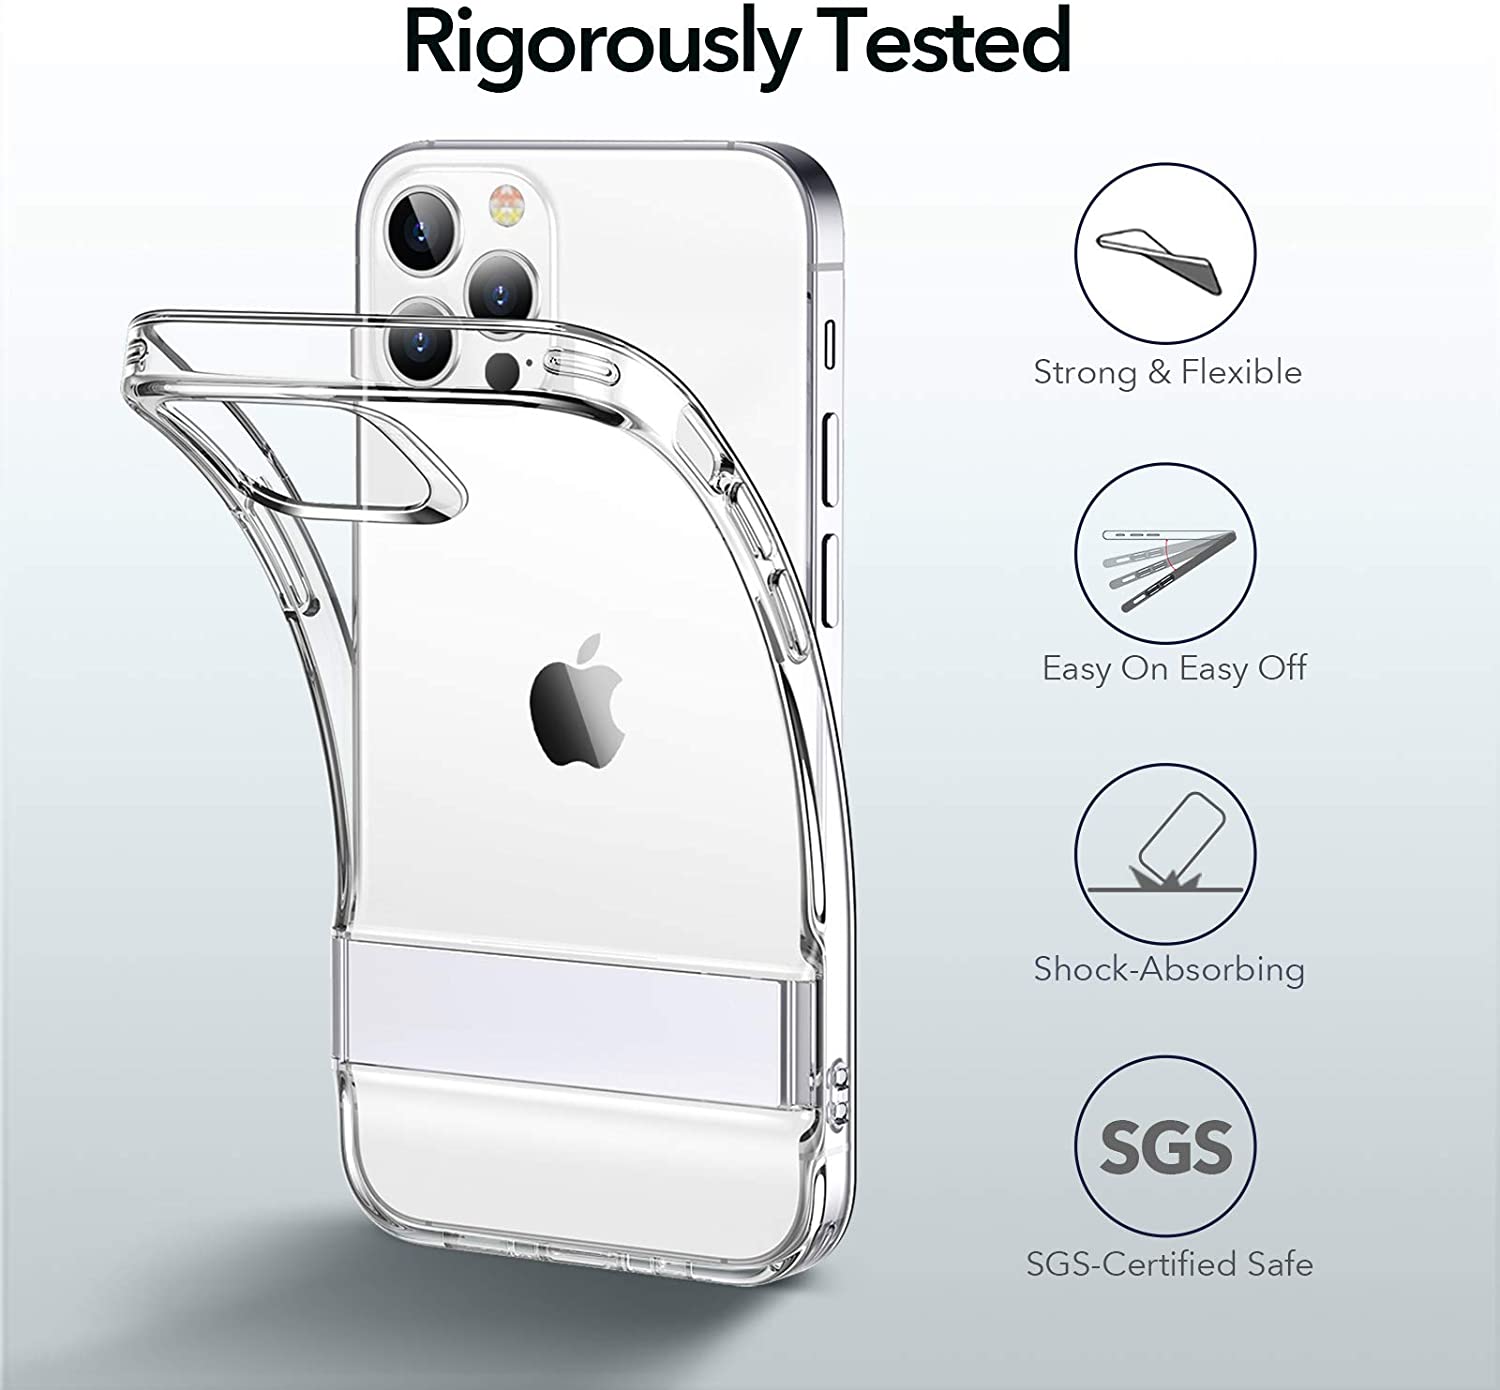 ESR Air Shield Boost High Quality Compatible with iPhone 12 Pro Max Case - Clear (110011)